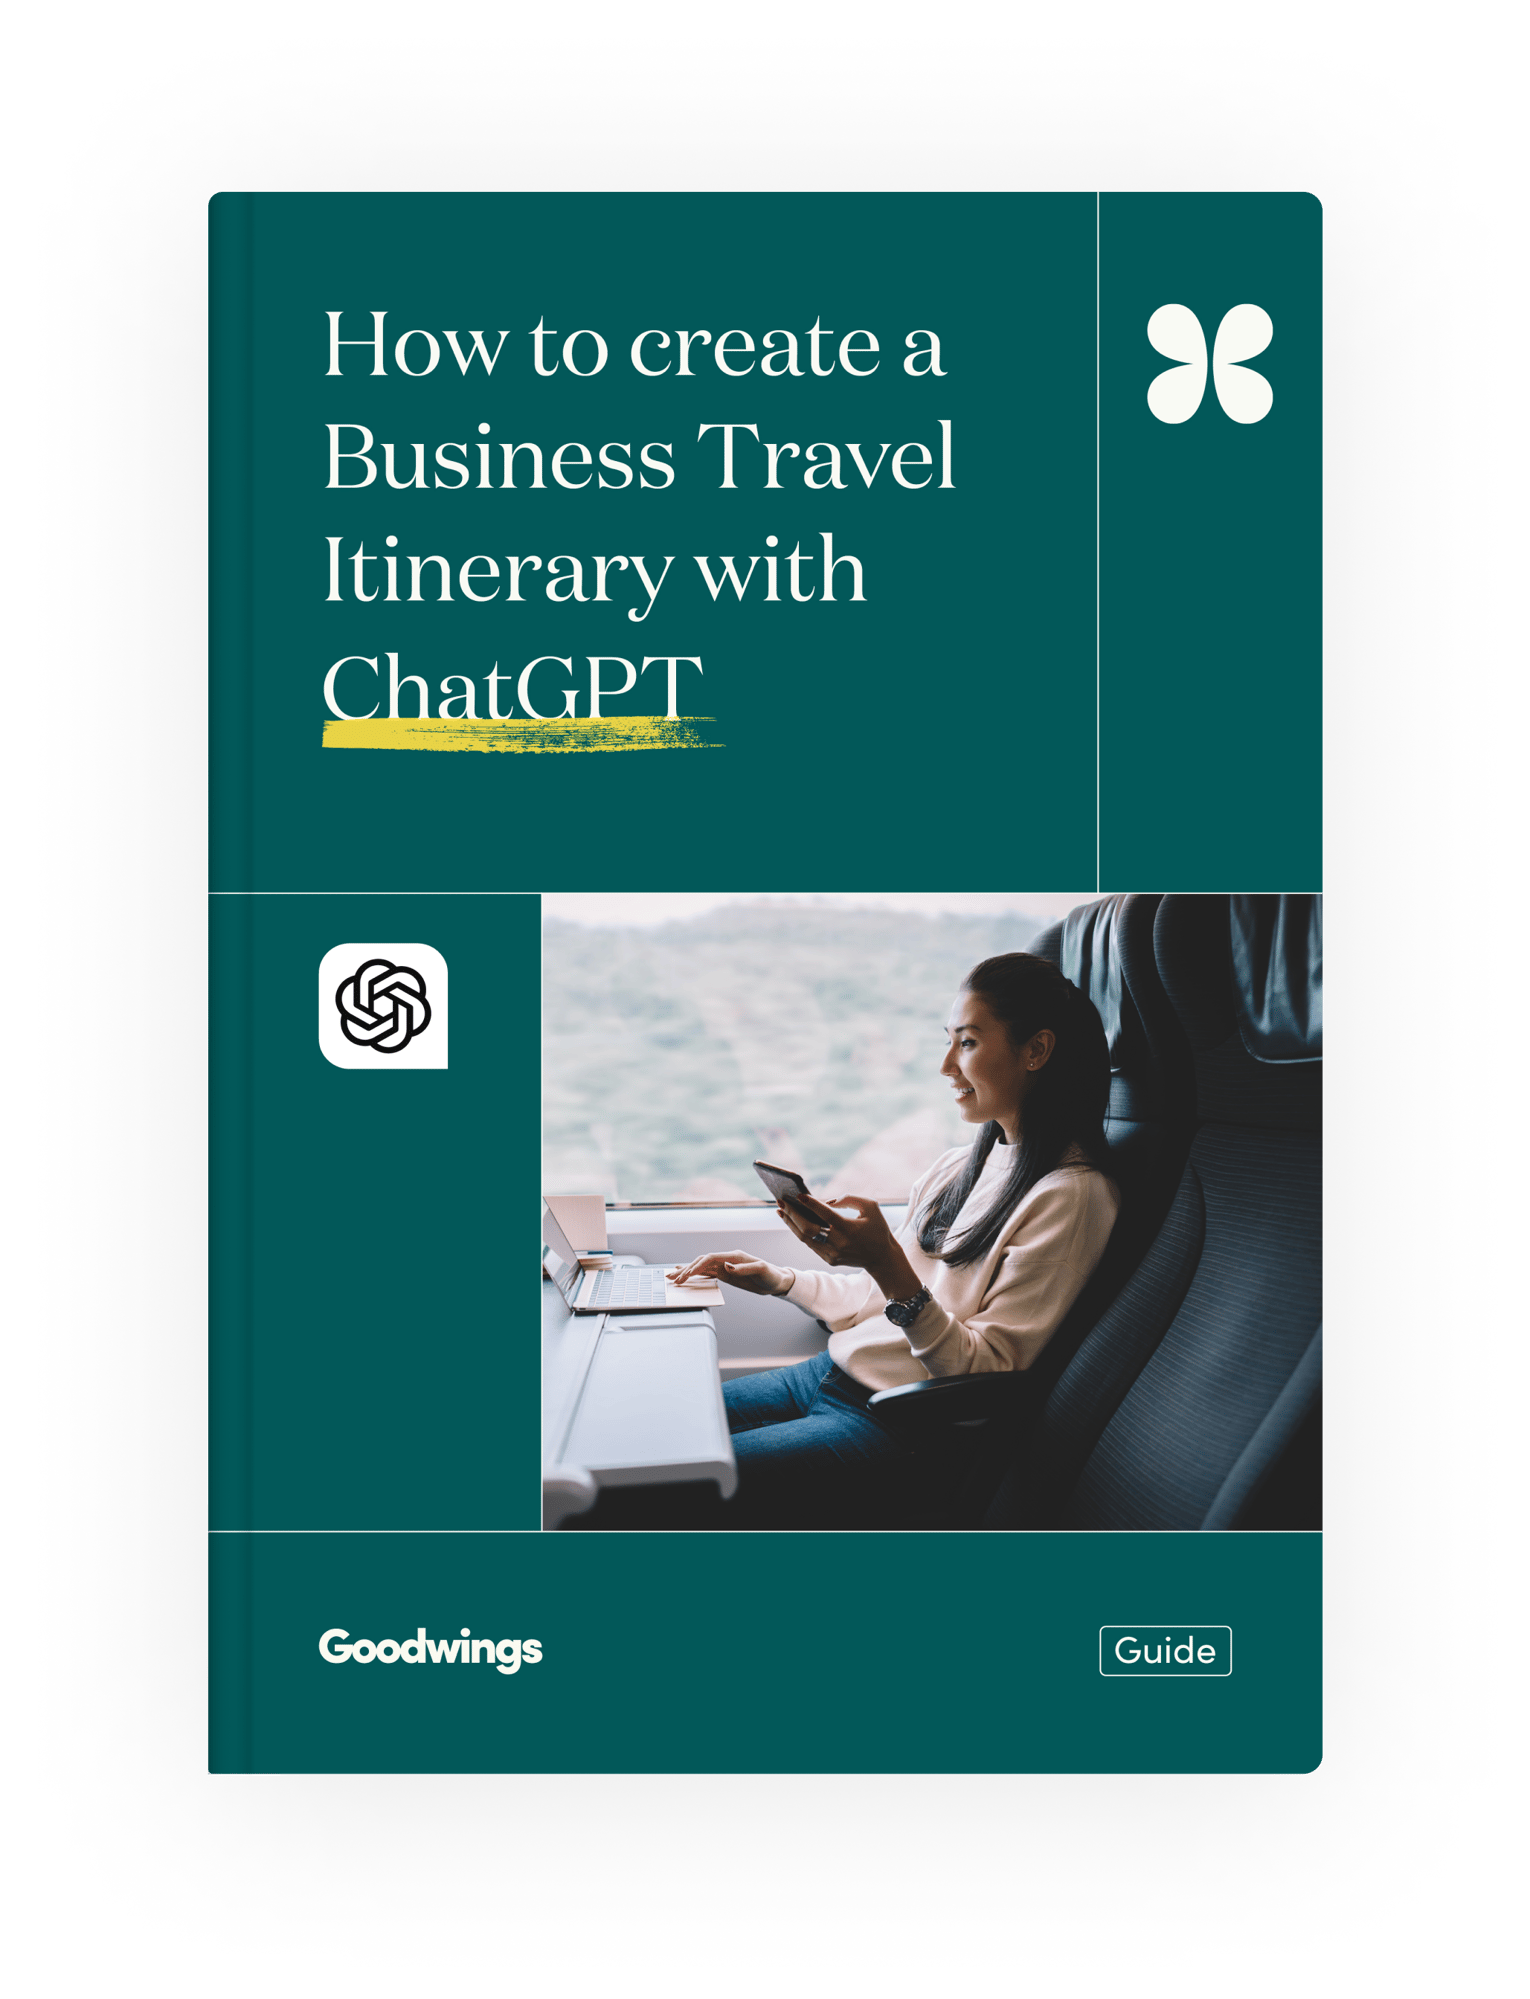 How to create a Business Travel Itinerary with ChatGPT